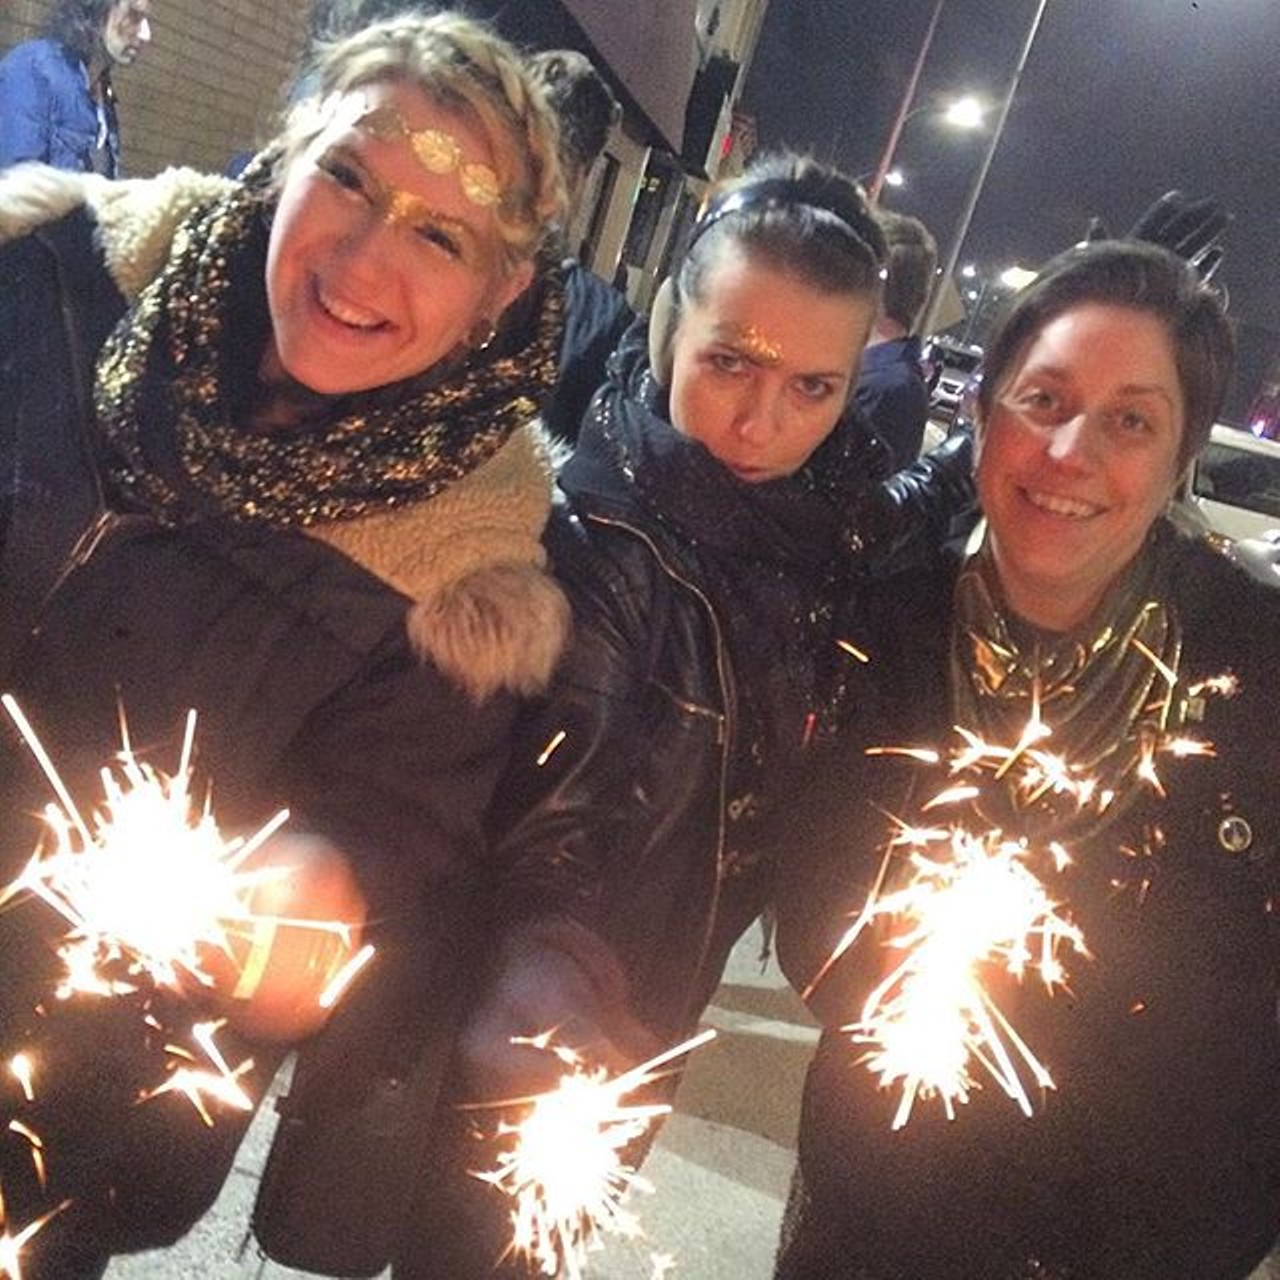 @detroitpartymarchingband: "100% chance of sparklers and glitter at Jean's tonight. #dpmb #hmf #hamtramckmusicfestival #detroitpartymarchingband"